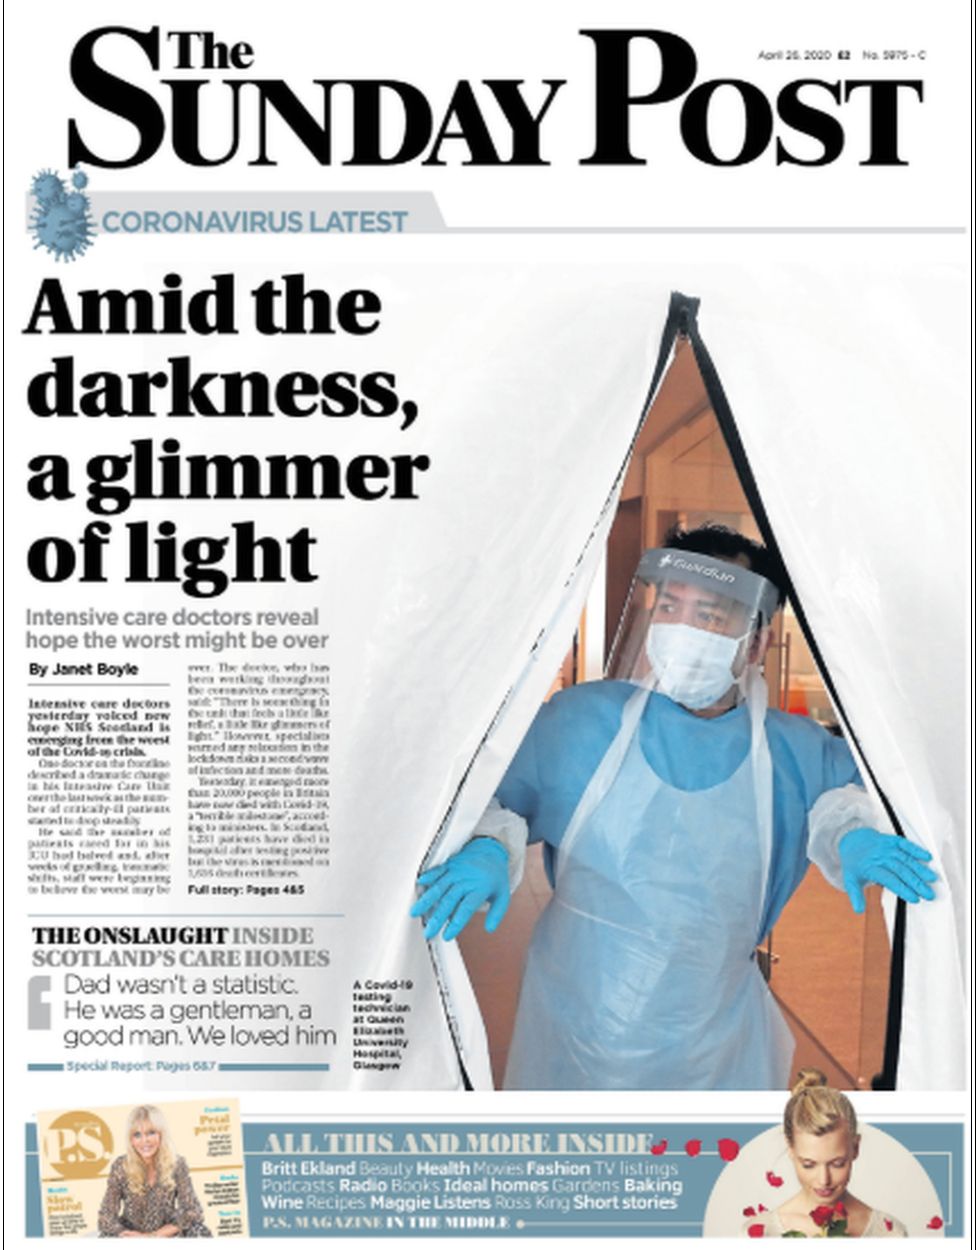 Scotland S Newspapers The Future Of Business As Usual And Ppe Offer c News